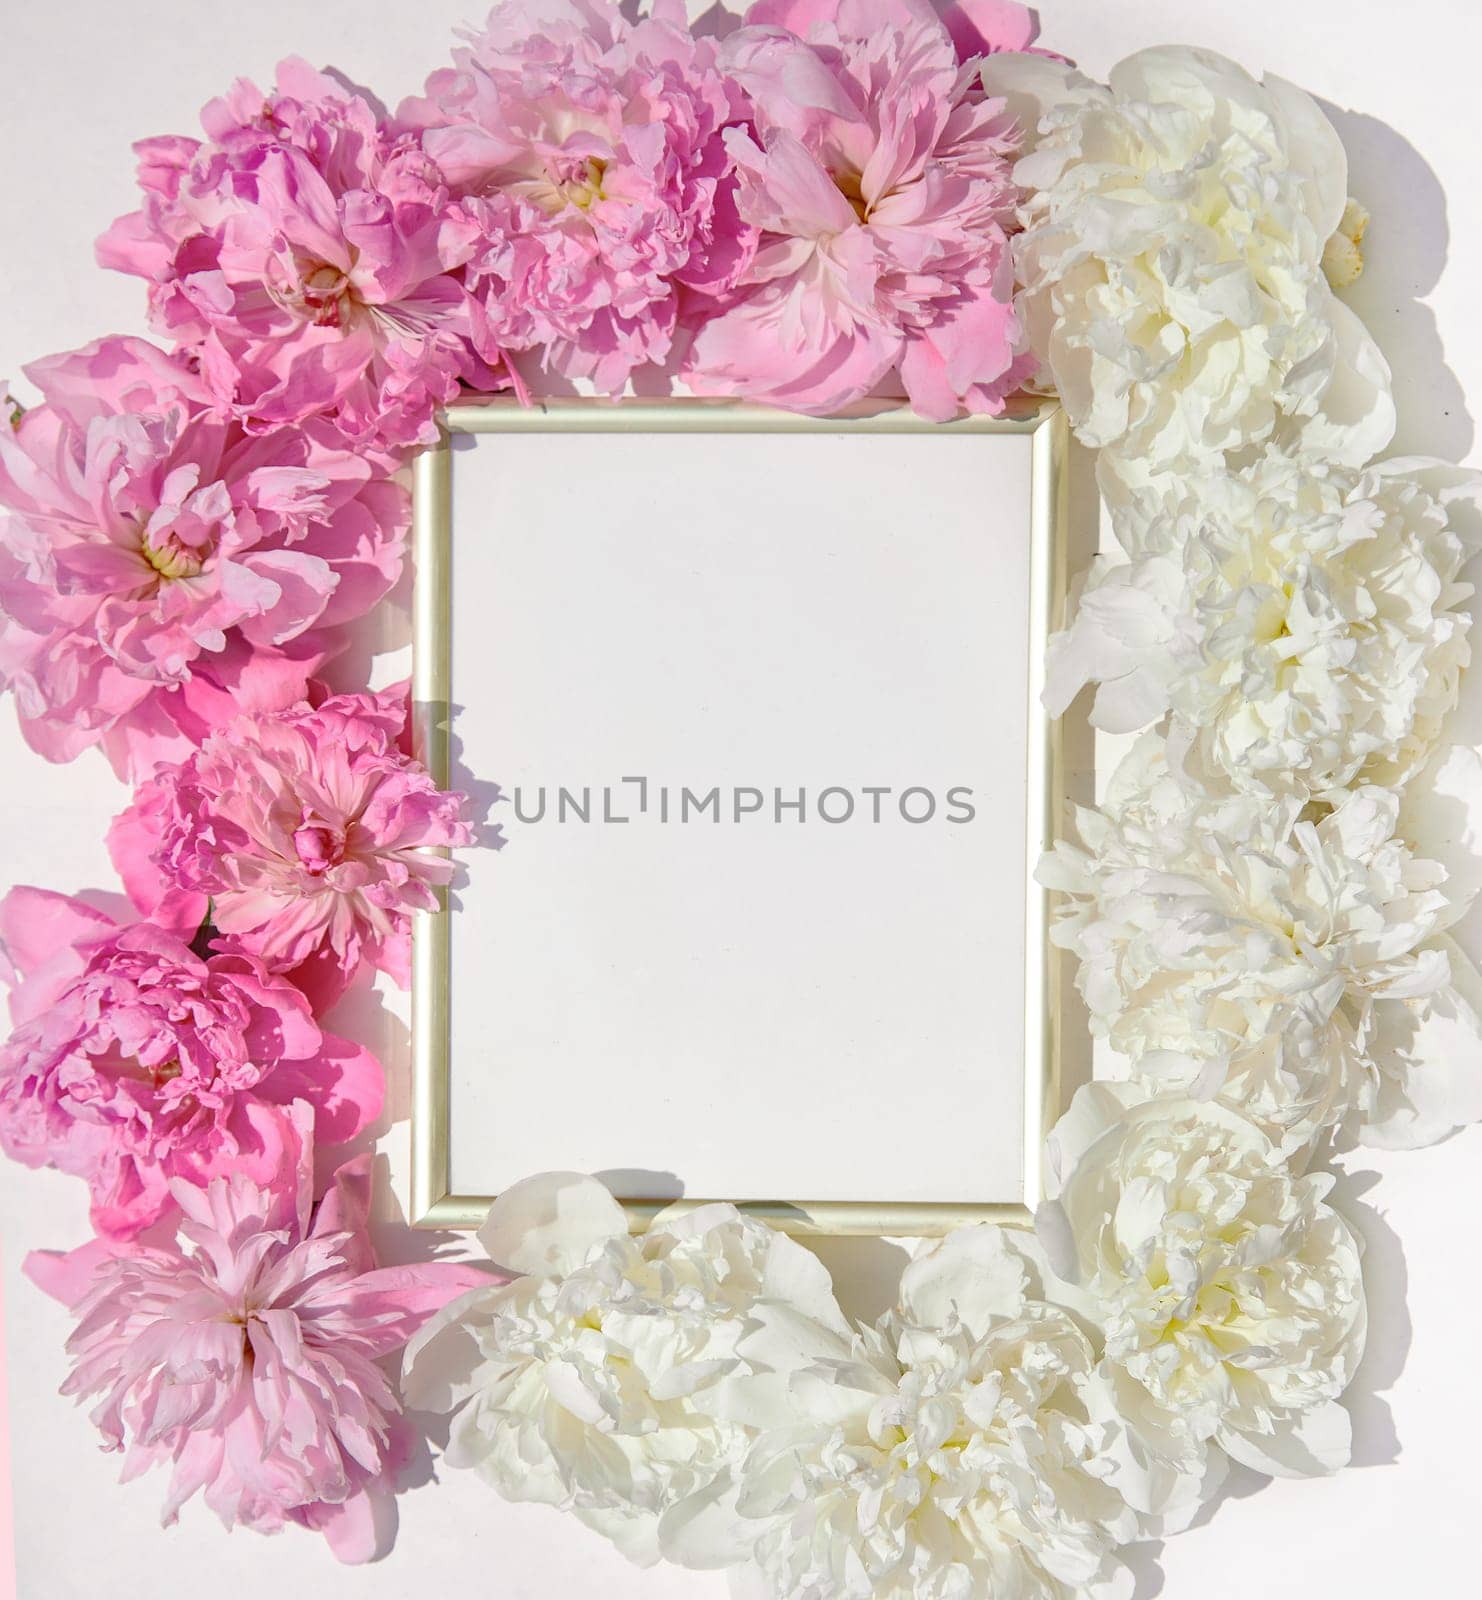 Beautiful frame with floral pions background. Free space for your design, mockup